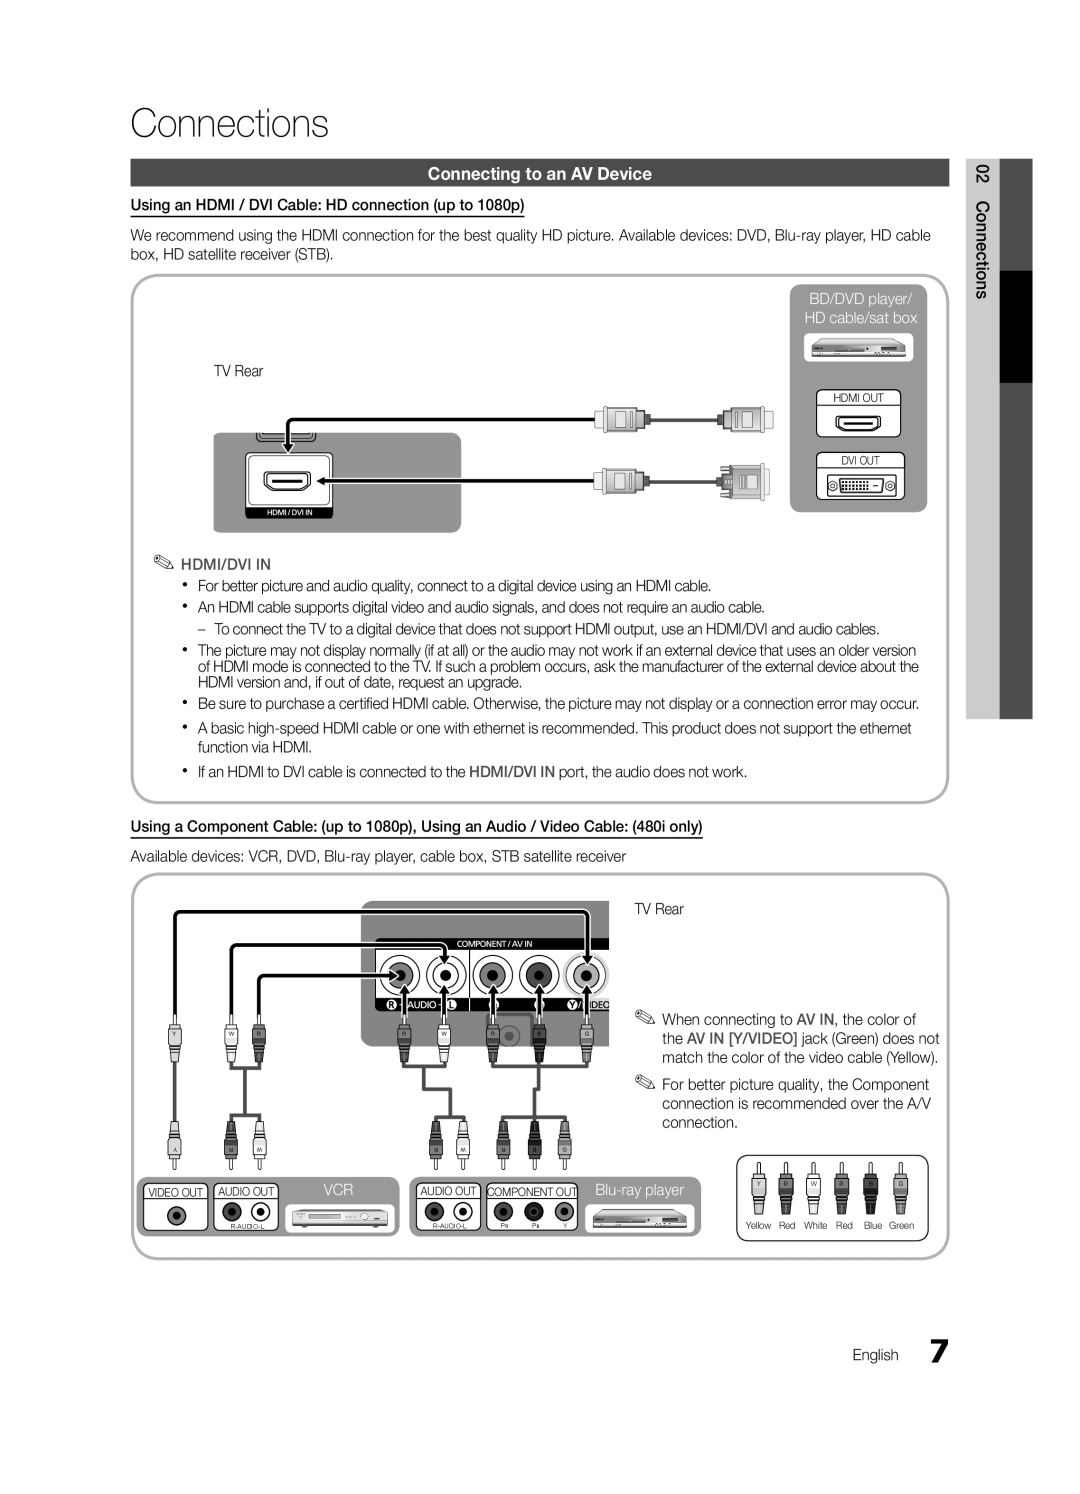 Samsung UN22D5003, UN19D4003 user manual Connections, Connecting to an AV Device, hDMI/DVI In 